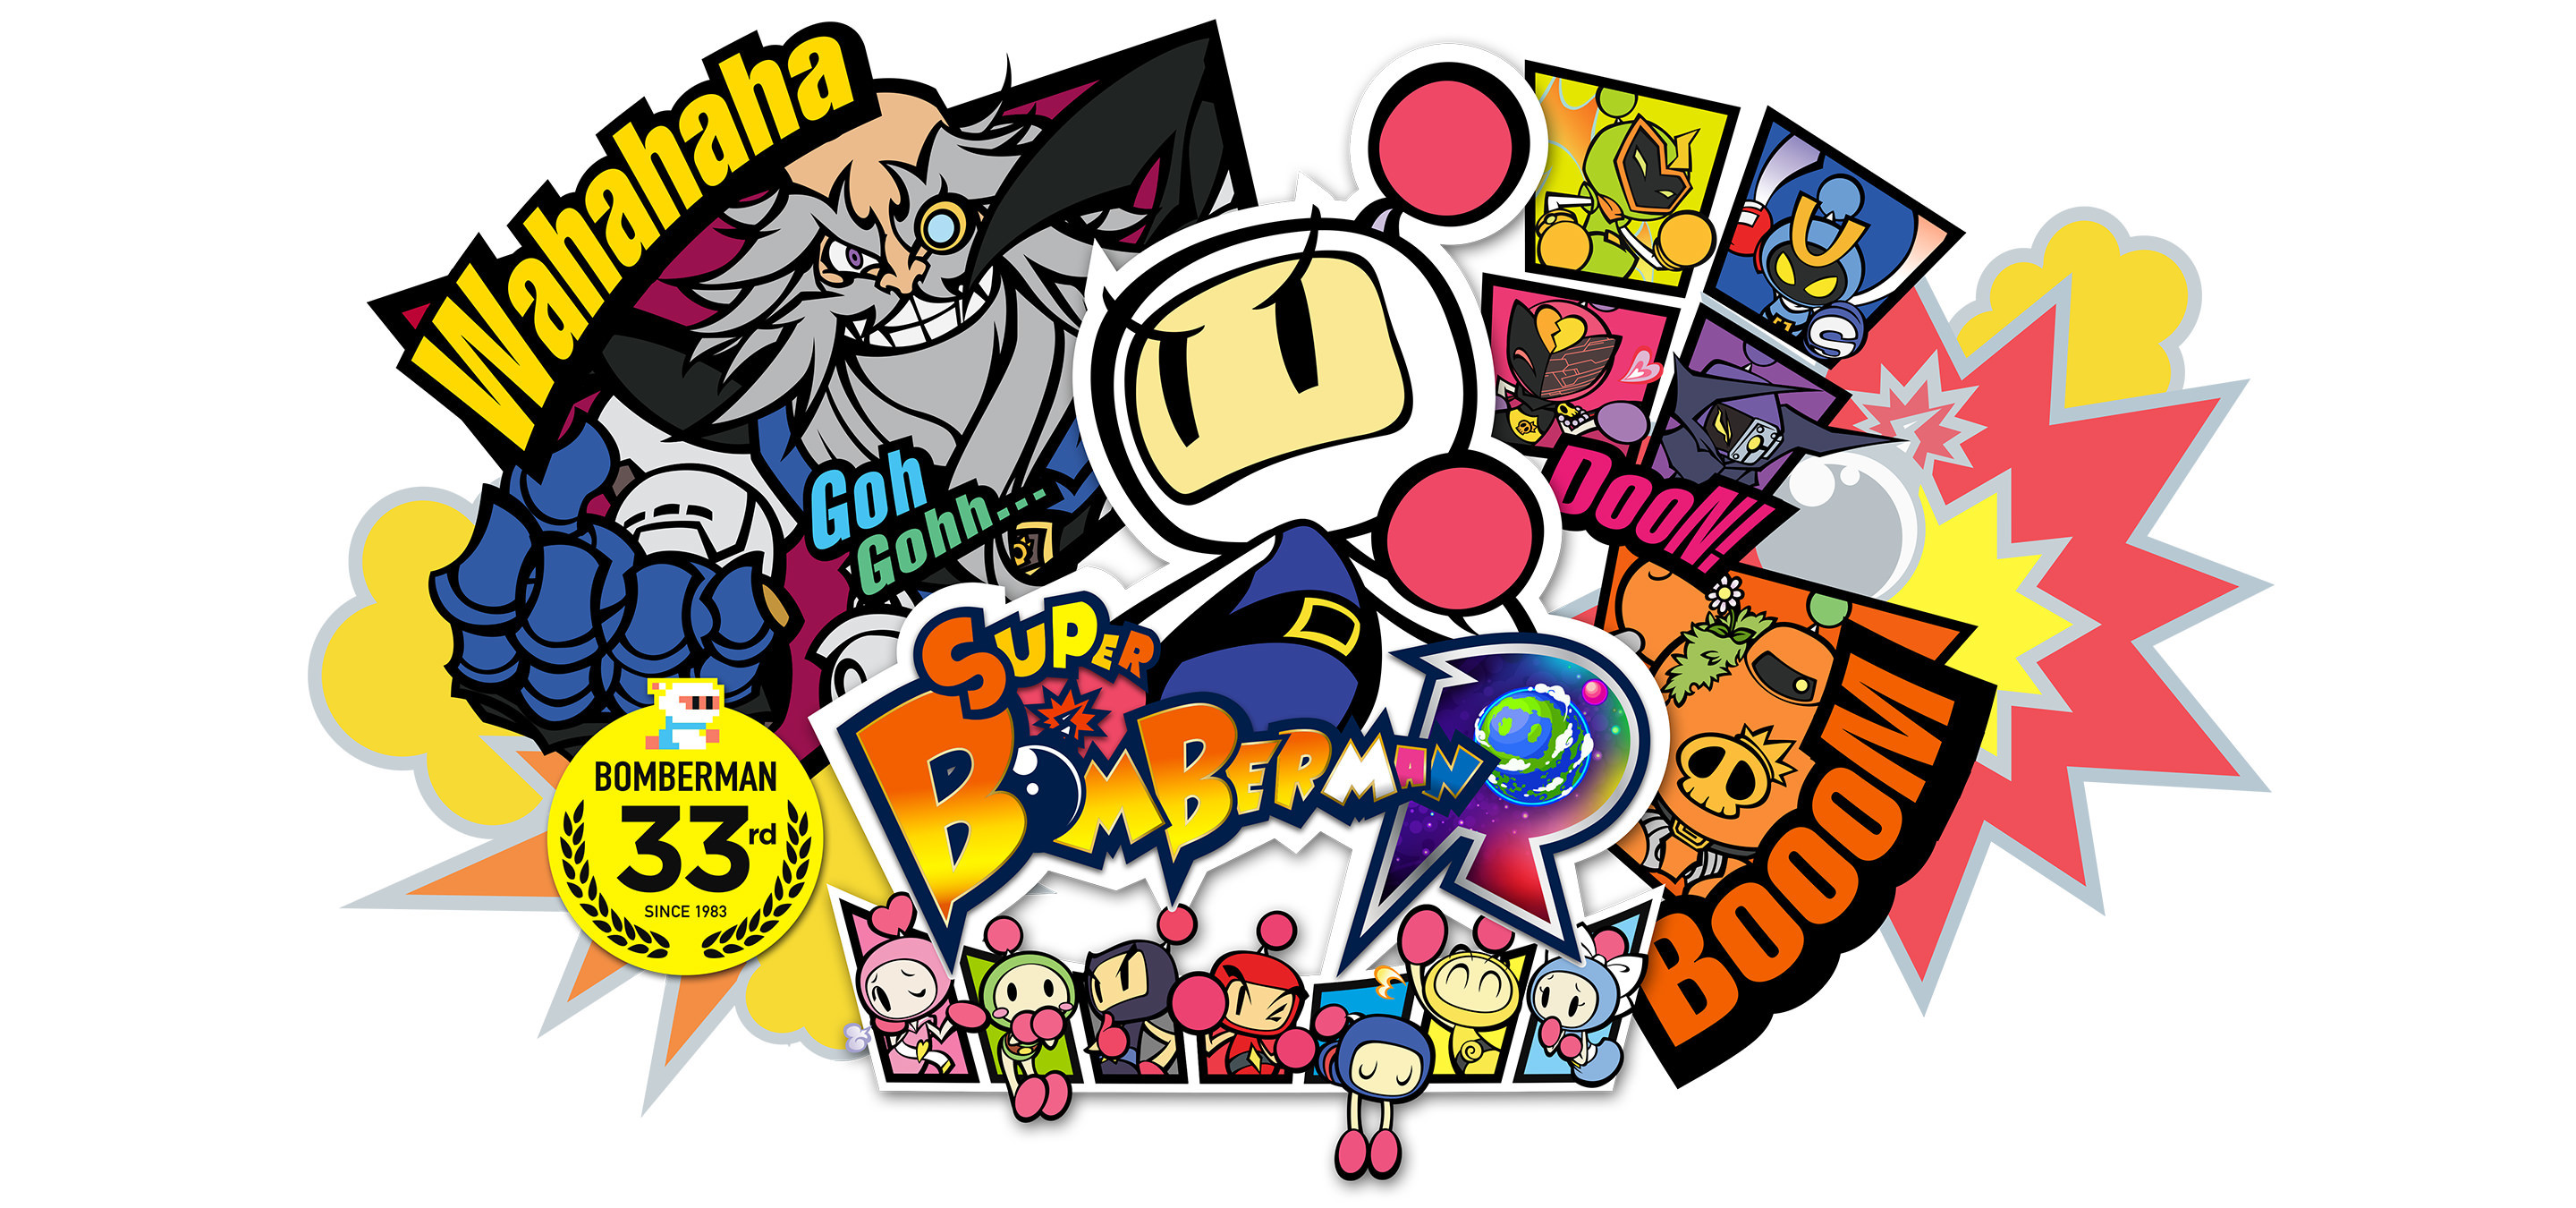 2880x1350 View, download, comment, and rate this  Super Bomberman R Wallpaper  - Wallpaper